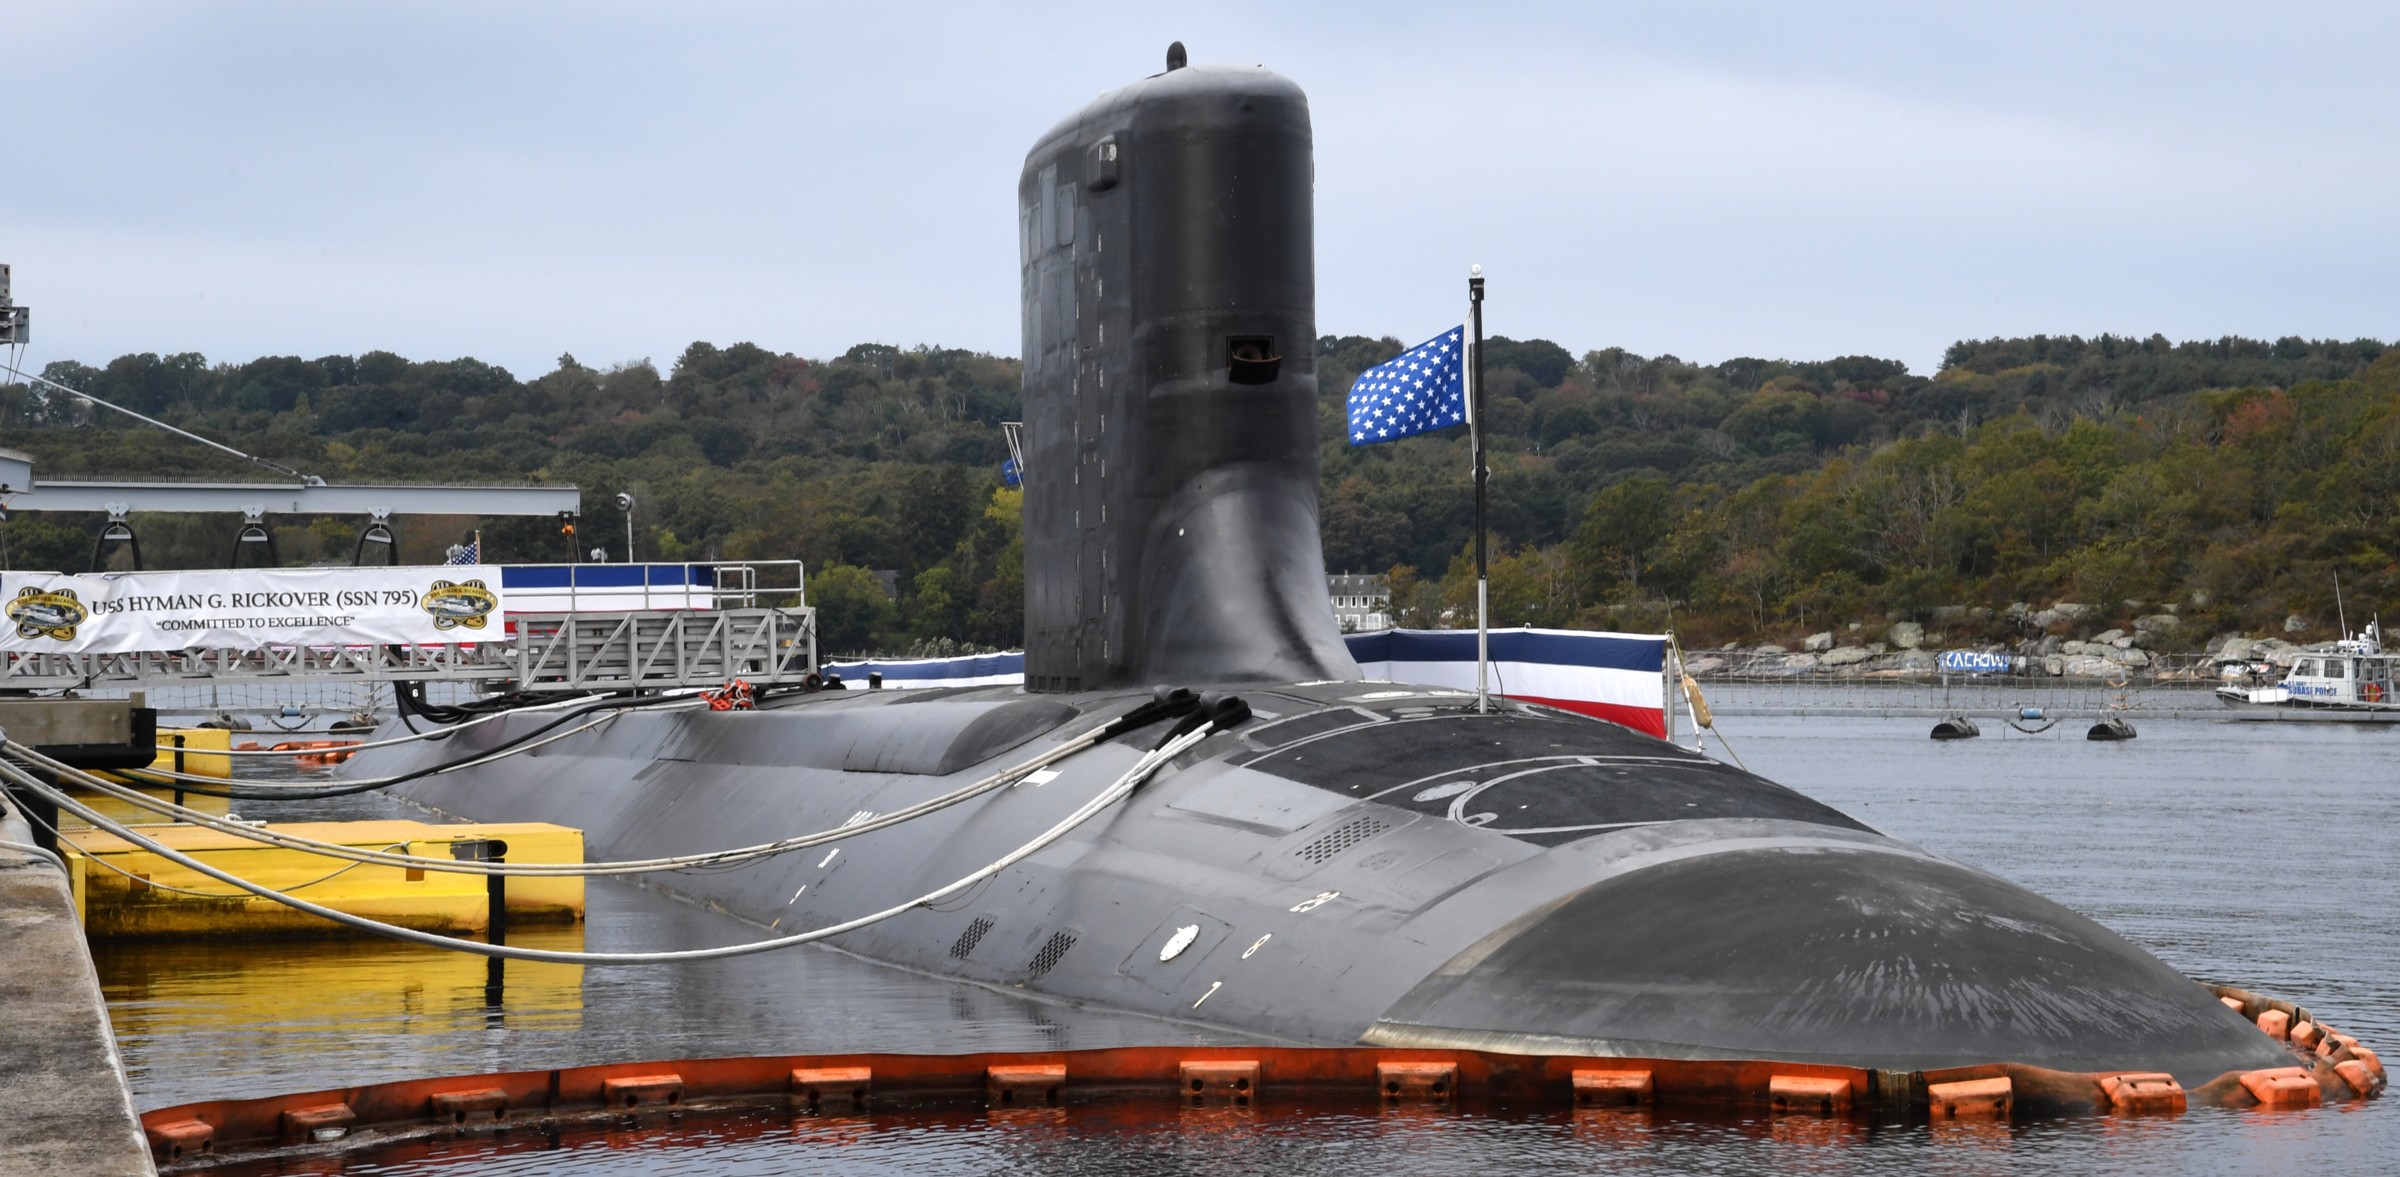 ssn-795 uss hyman g. rickover virginia class attack submarine us navy commissioning ceremony 20